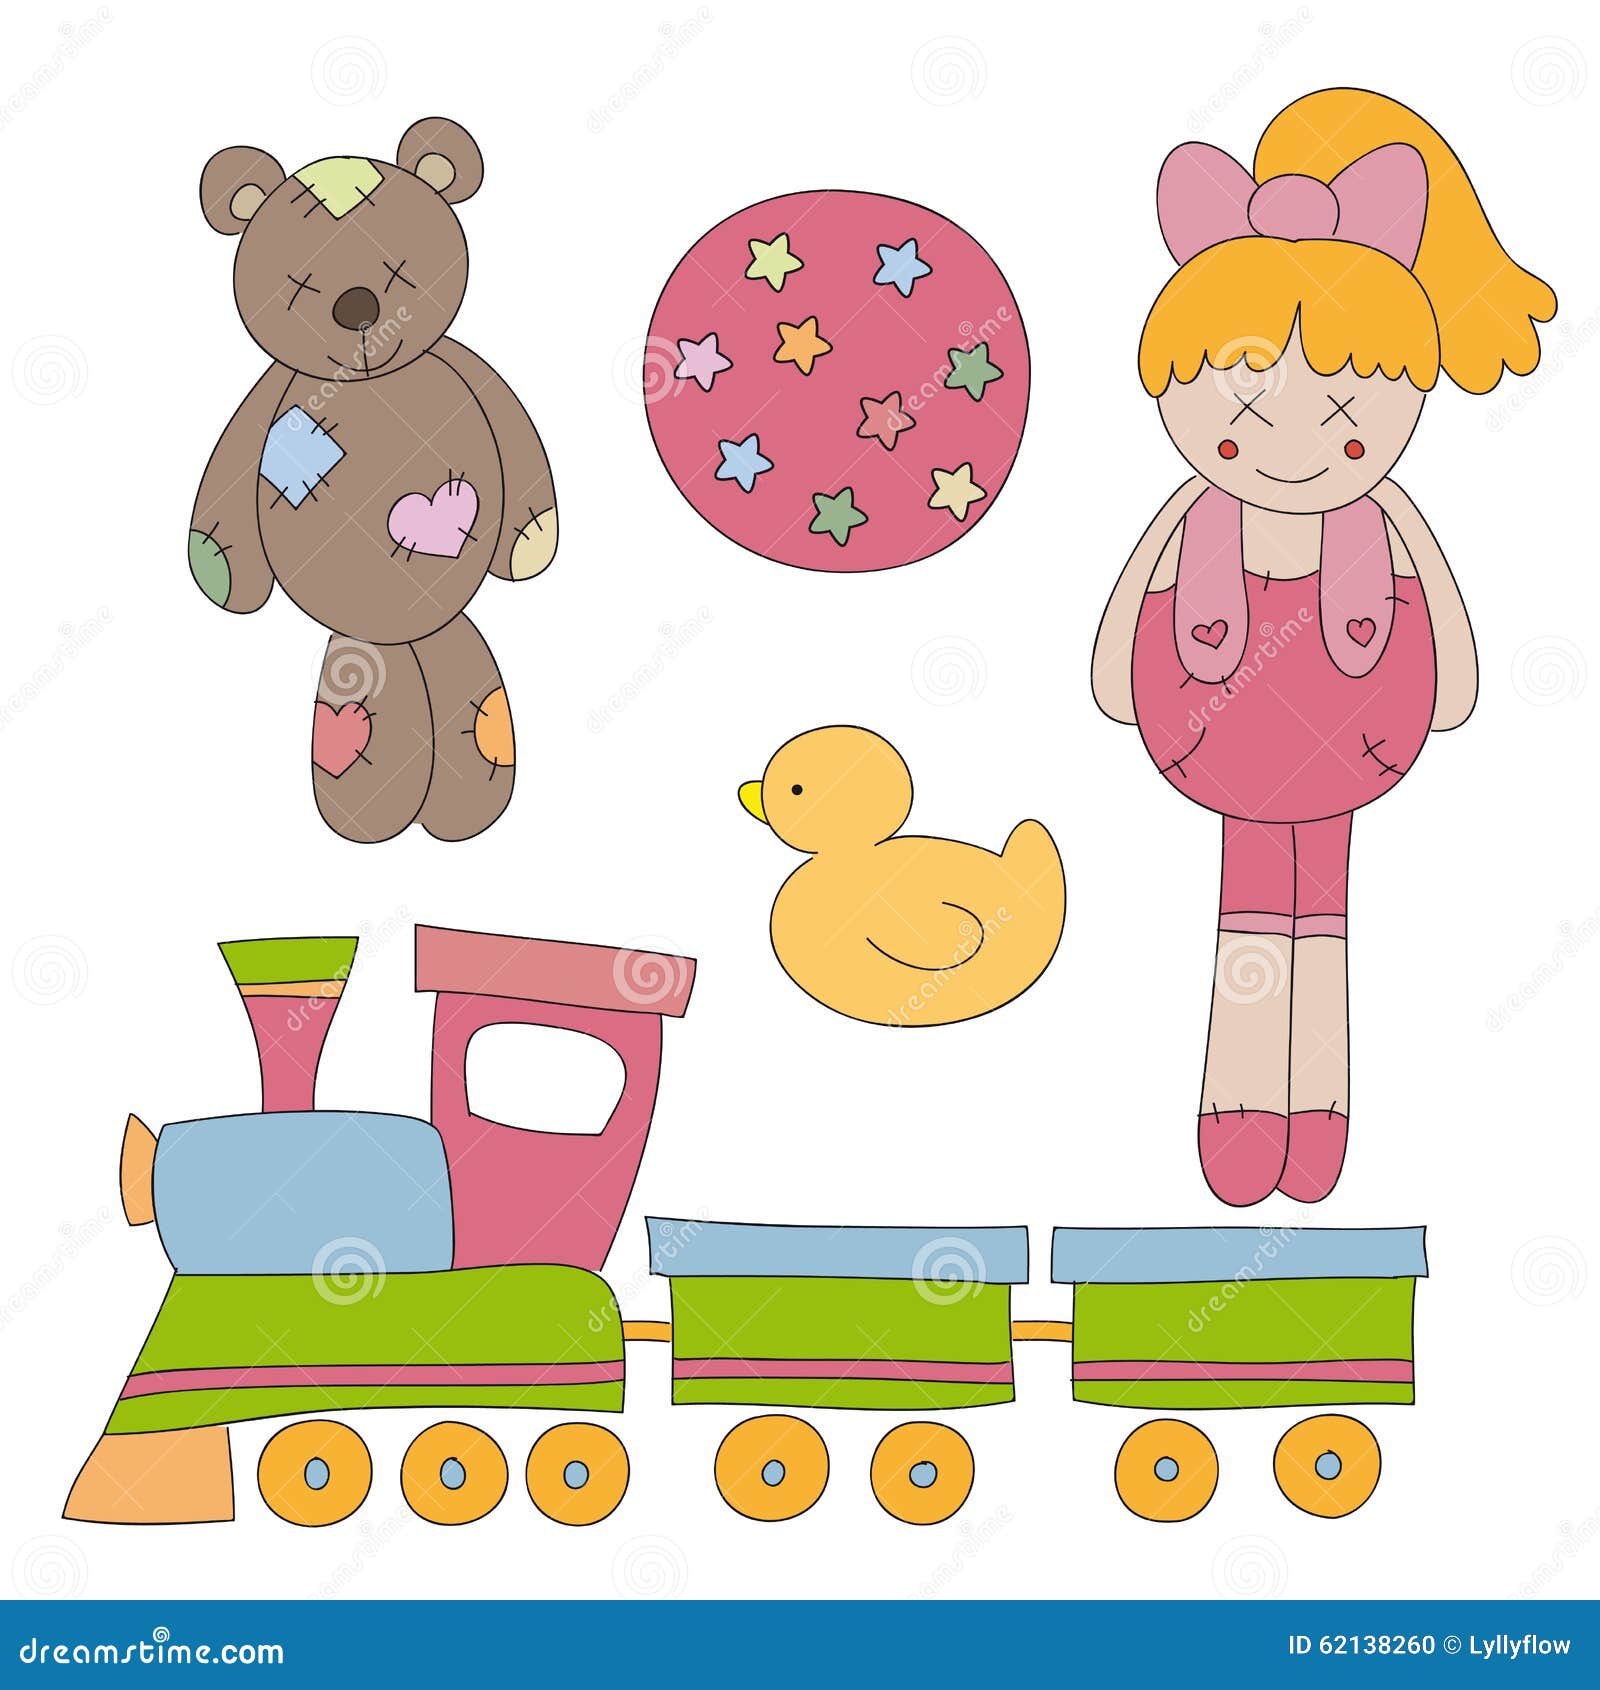 clip art toys and games - photo #25